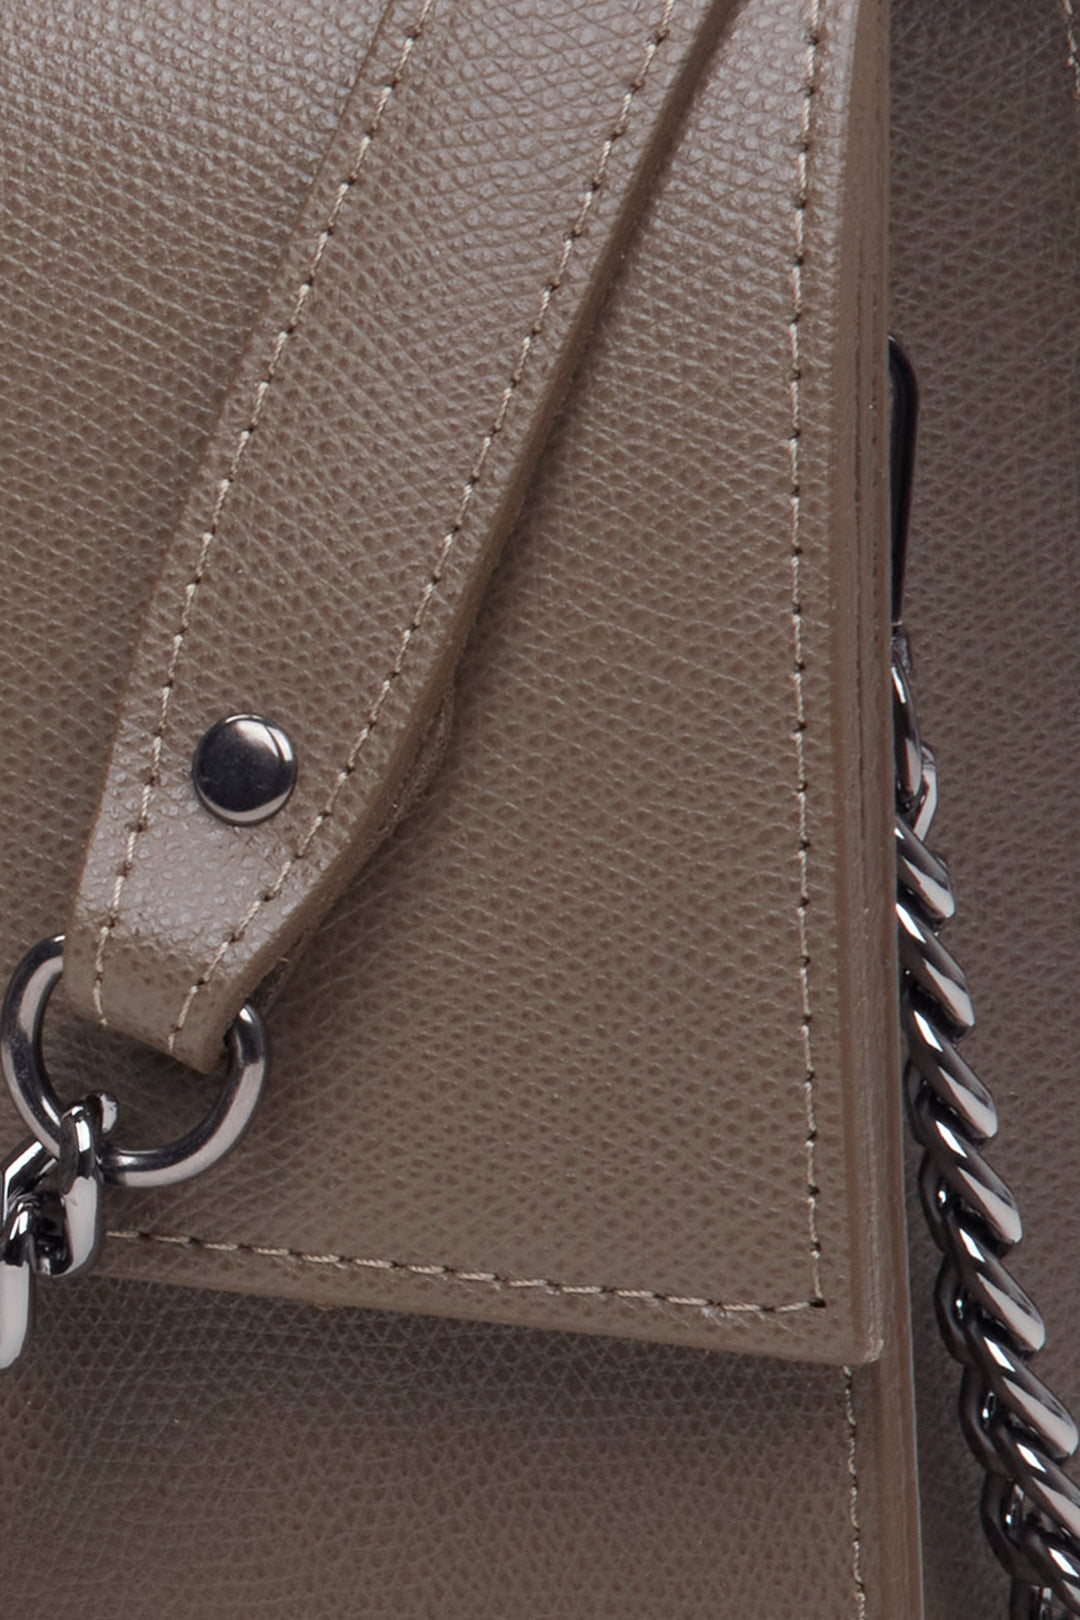 Women's brown leather handbag with a flap by Estro - close-up on the details.